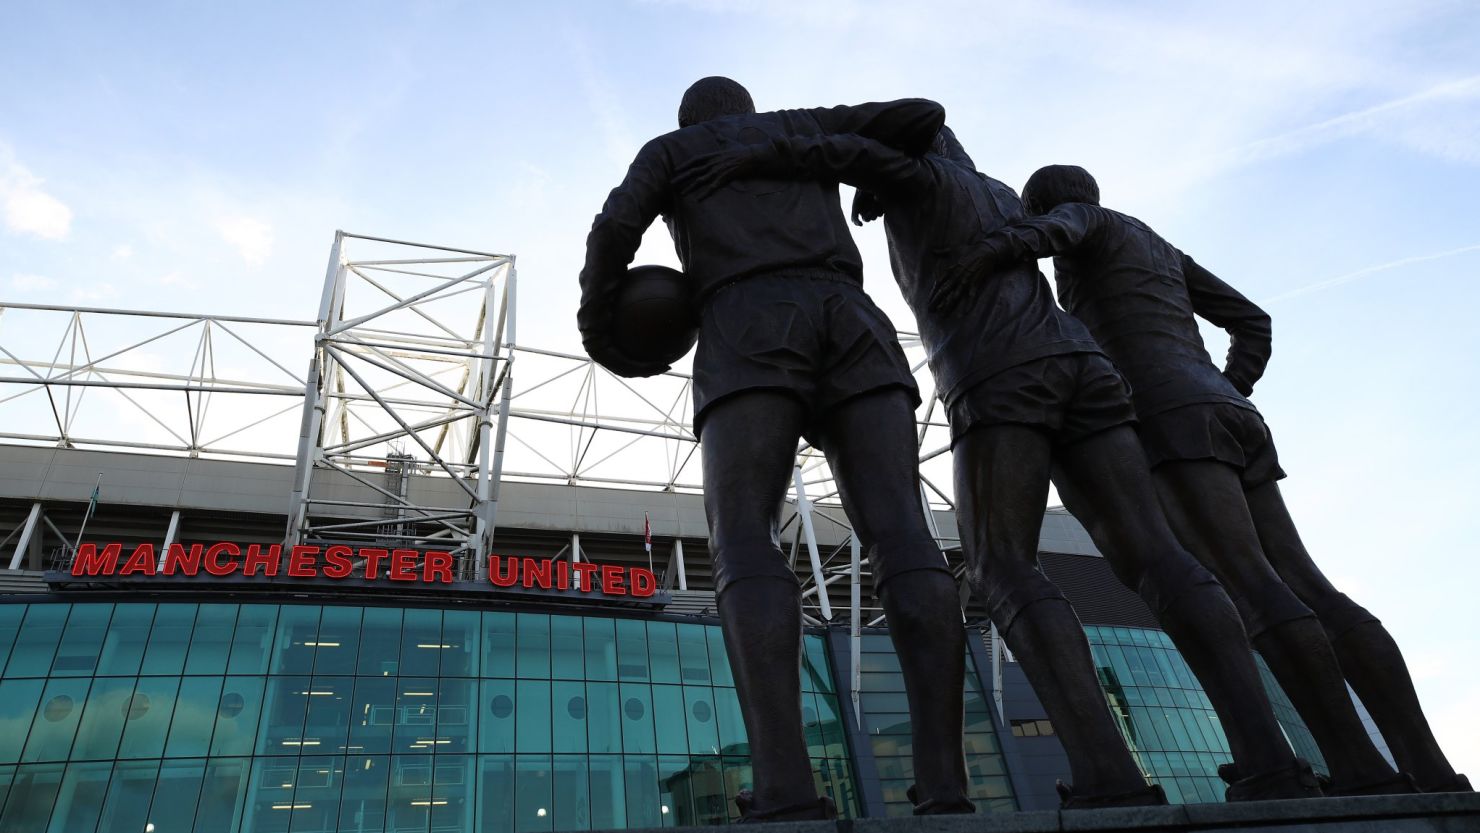 Manchester United tweeted its condolences accompanied by a photo of the iconic "Holy Trinity" statue in front of Old Trafford. 